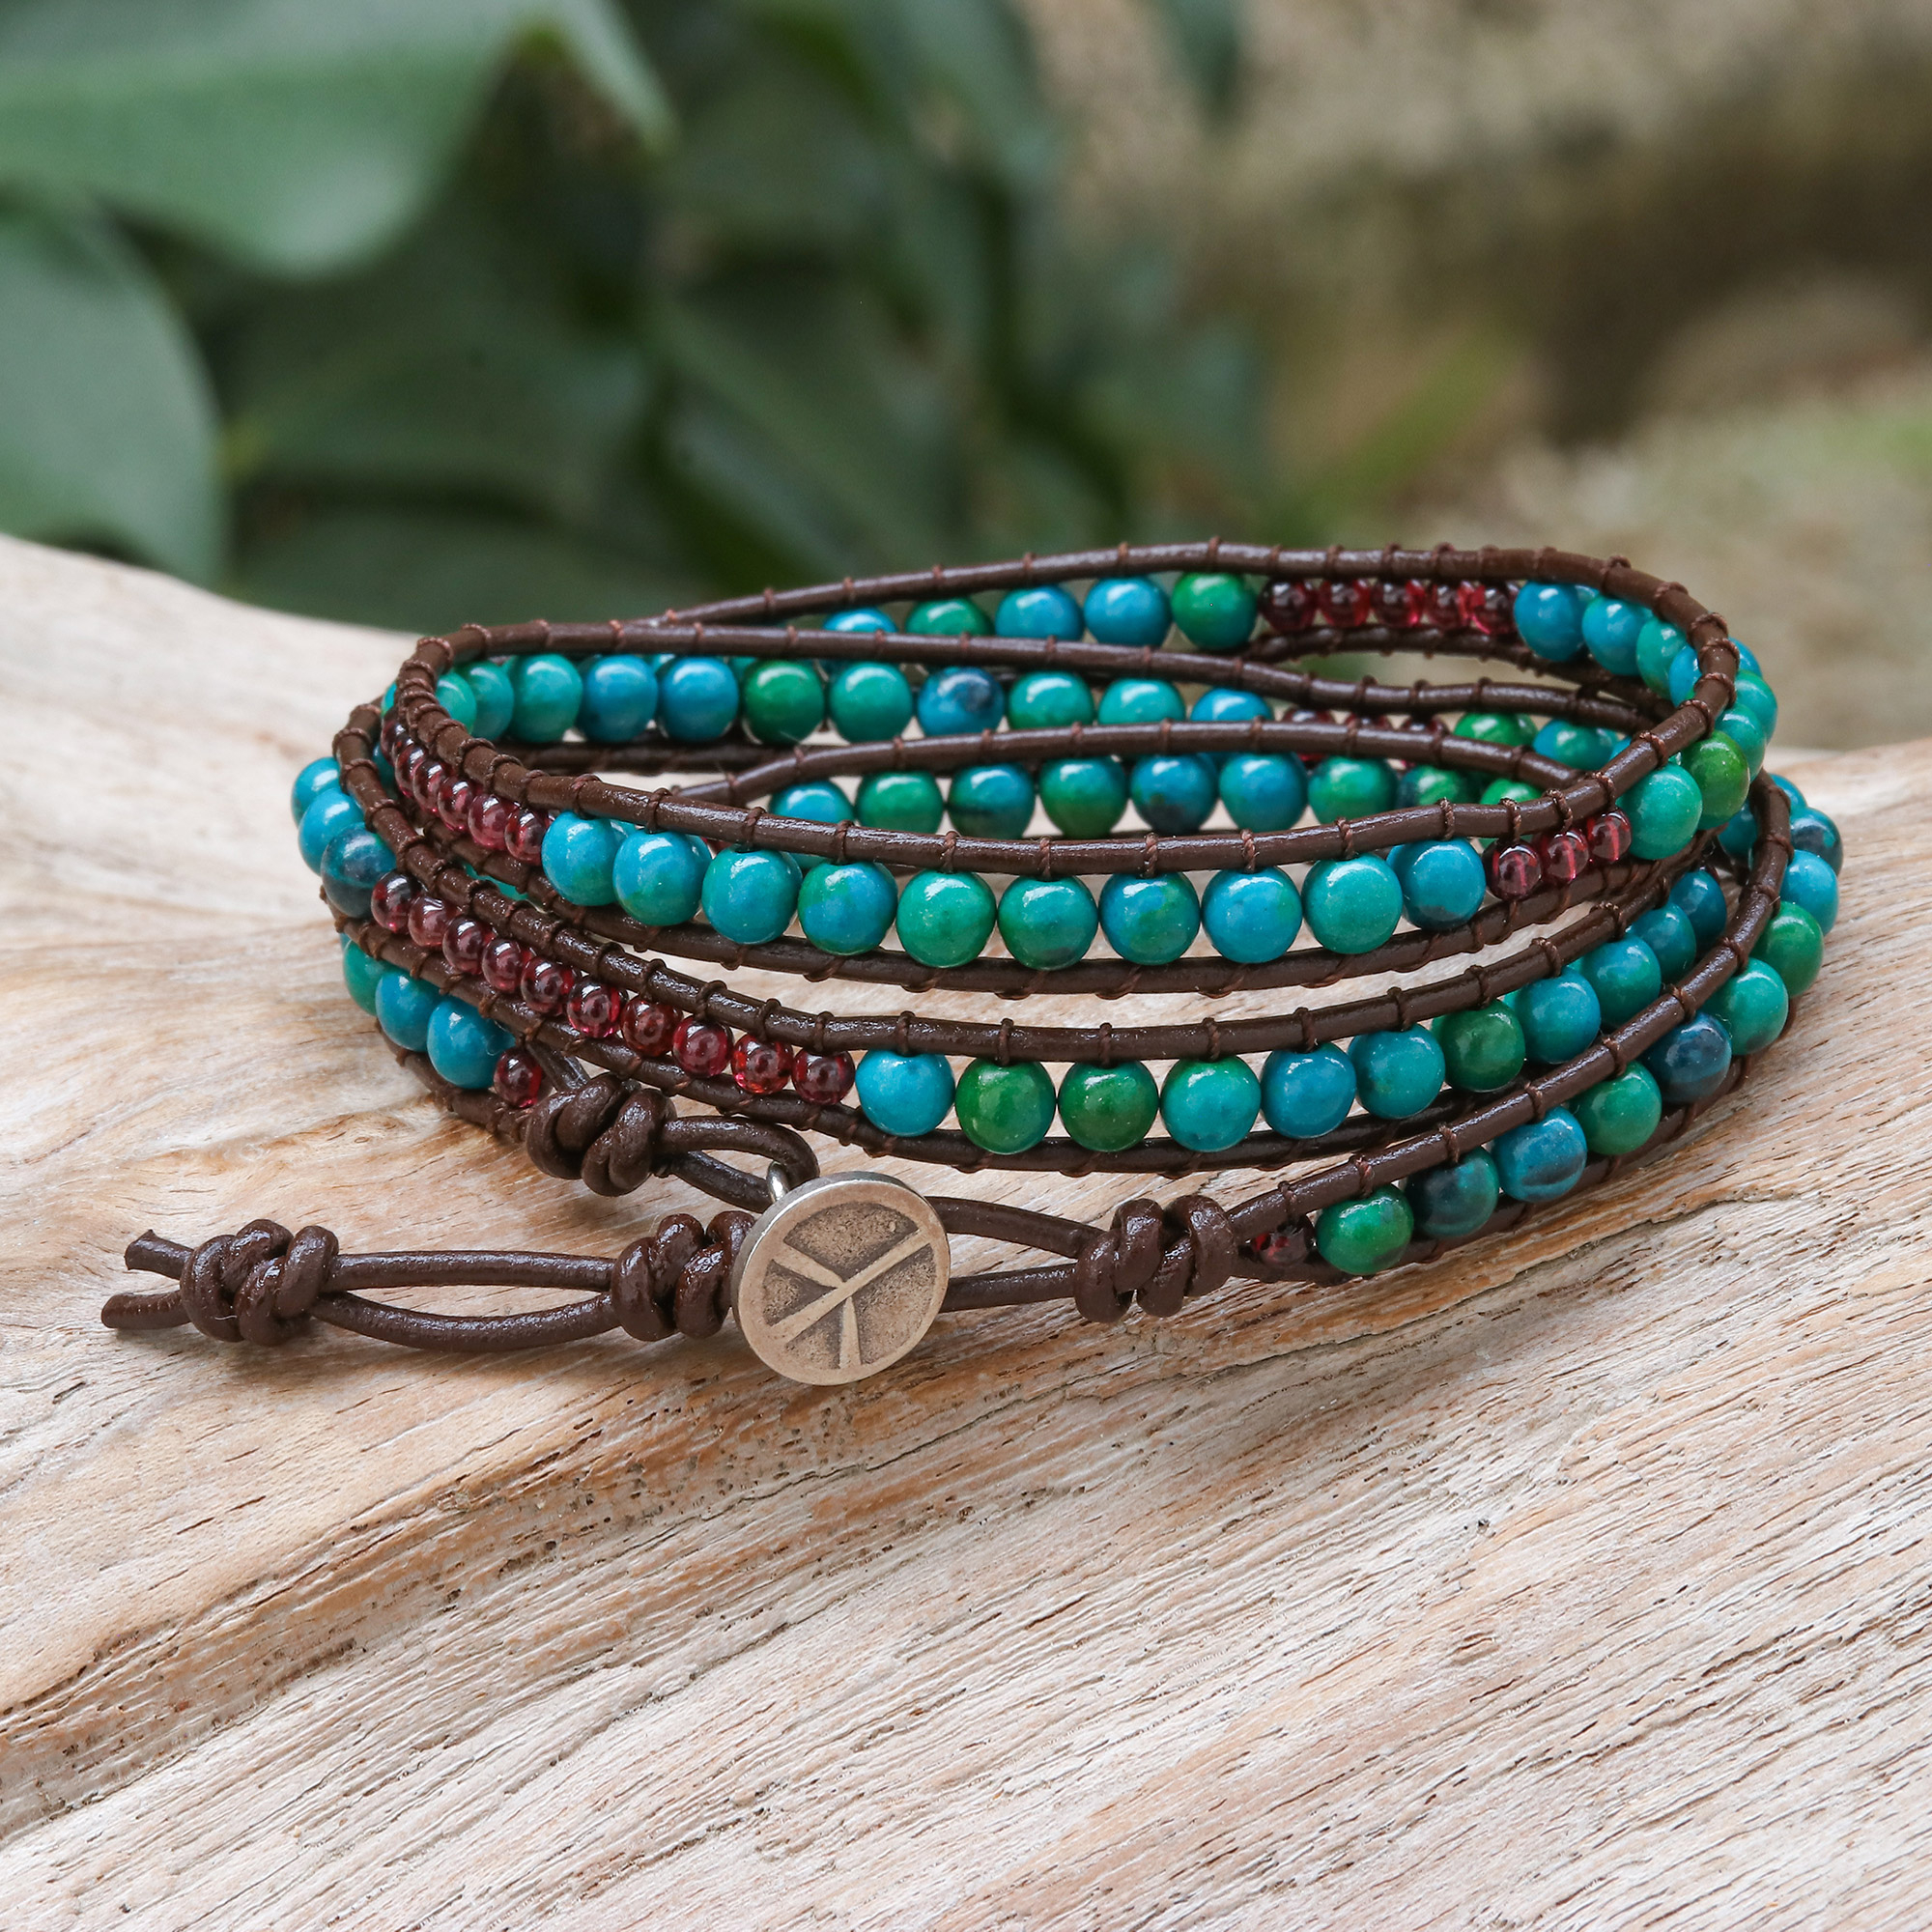 Leather Wrap Bracelet with Semiprecious Stone Crystal and Handmade Beads   HighQuality EcoFriendly Mats Gear Props Clothing and Accessories